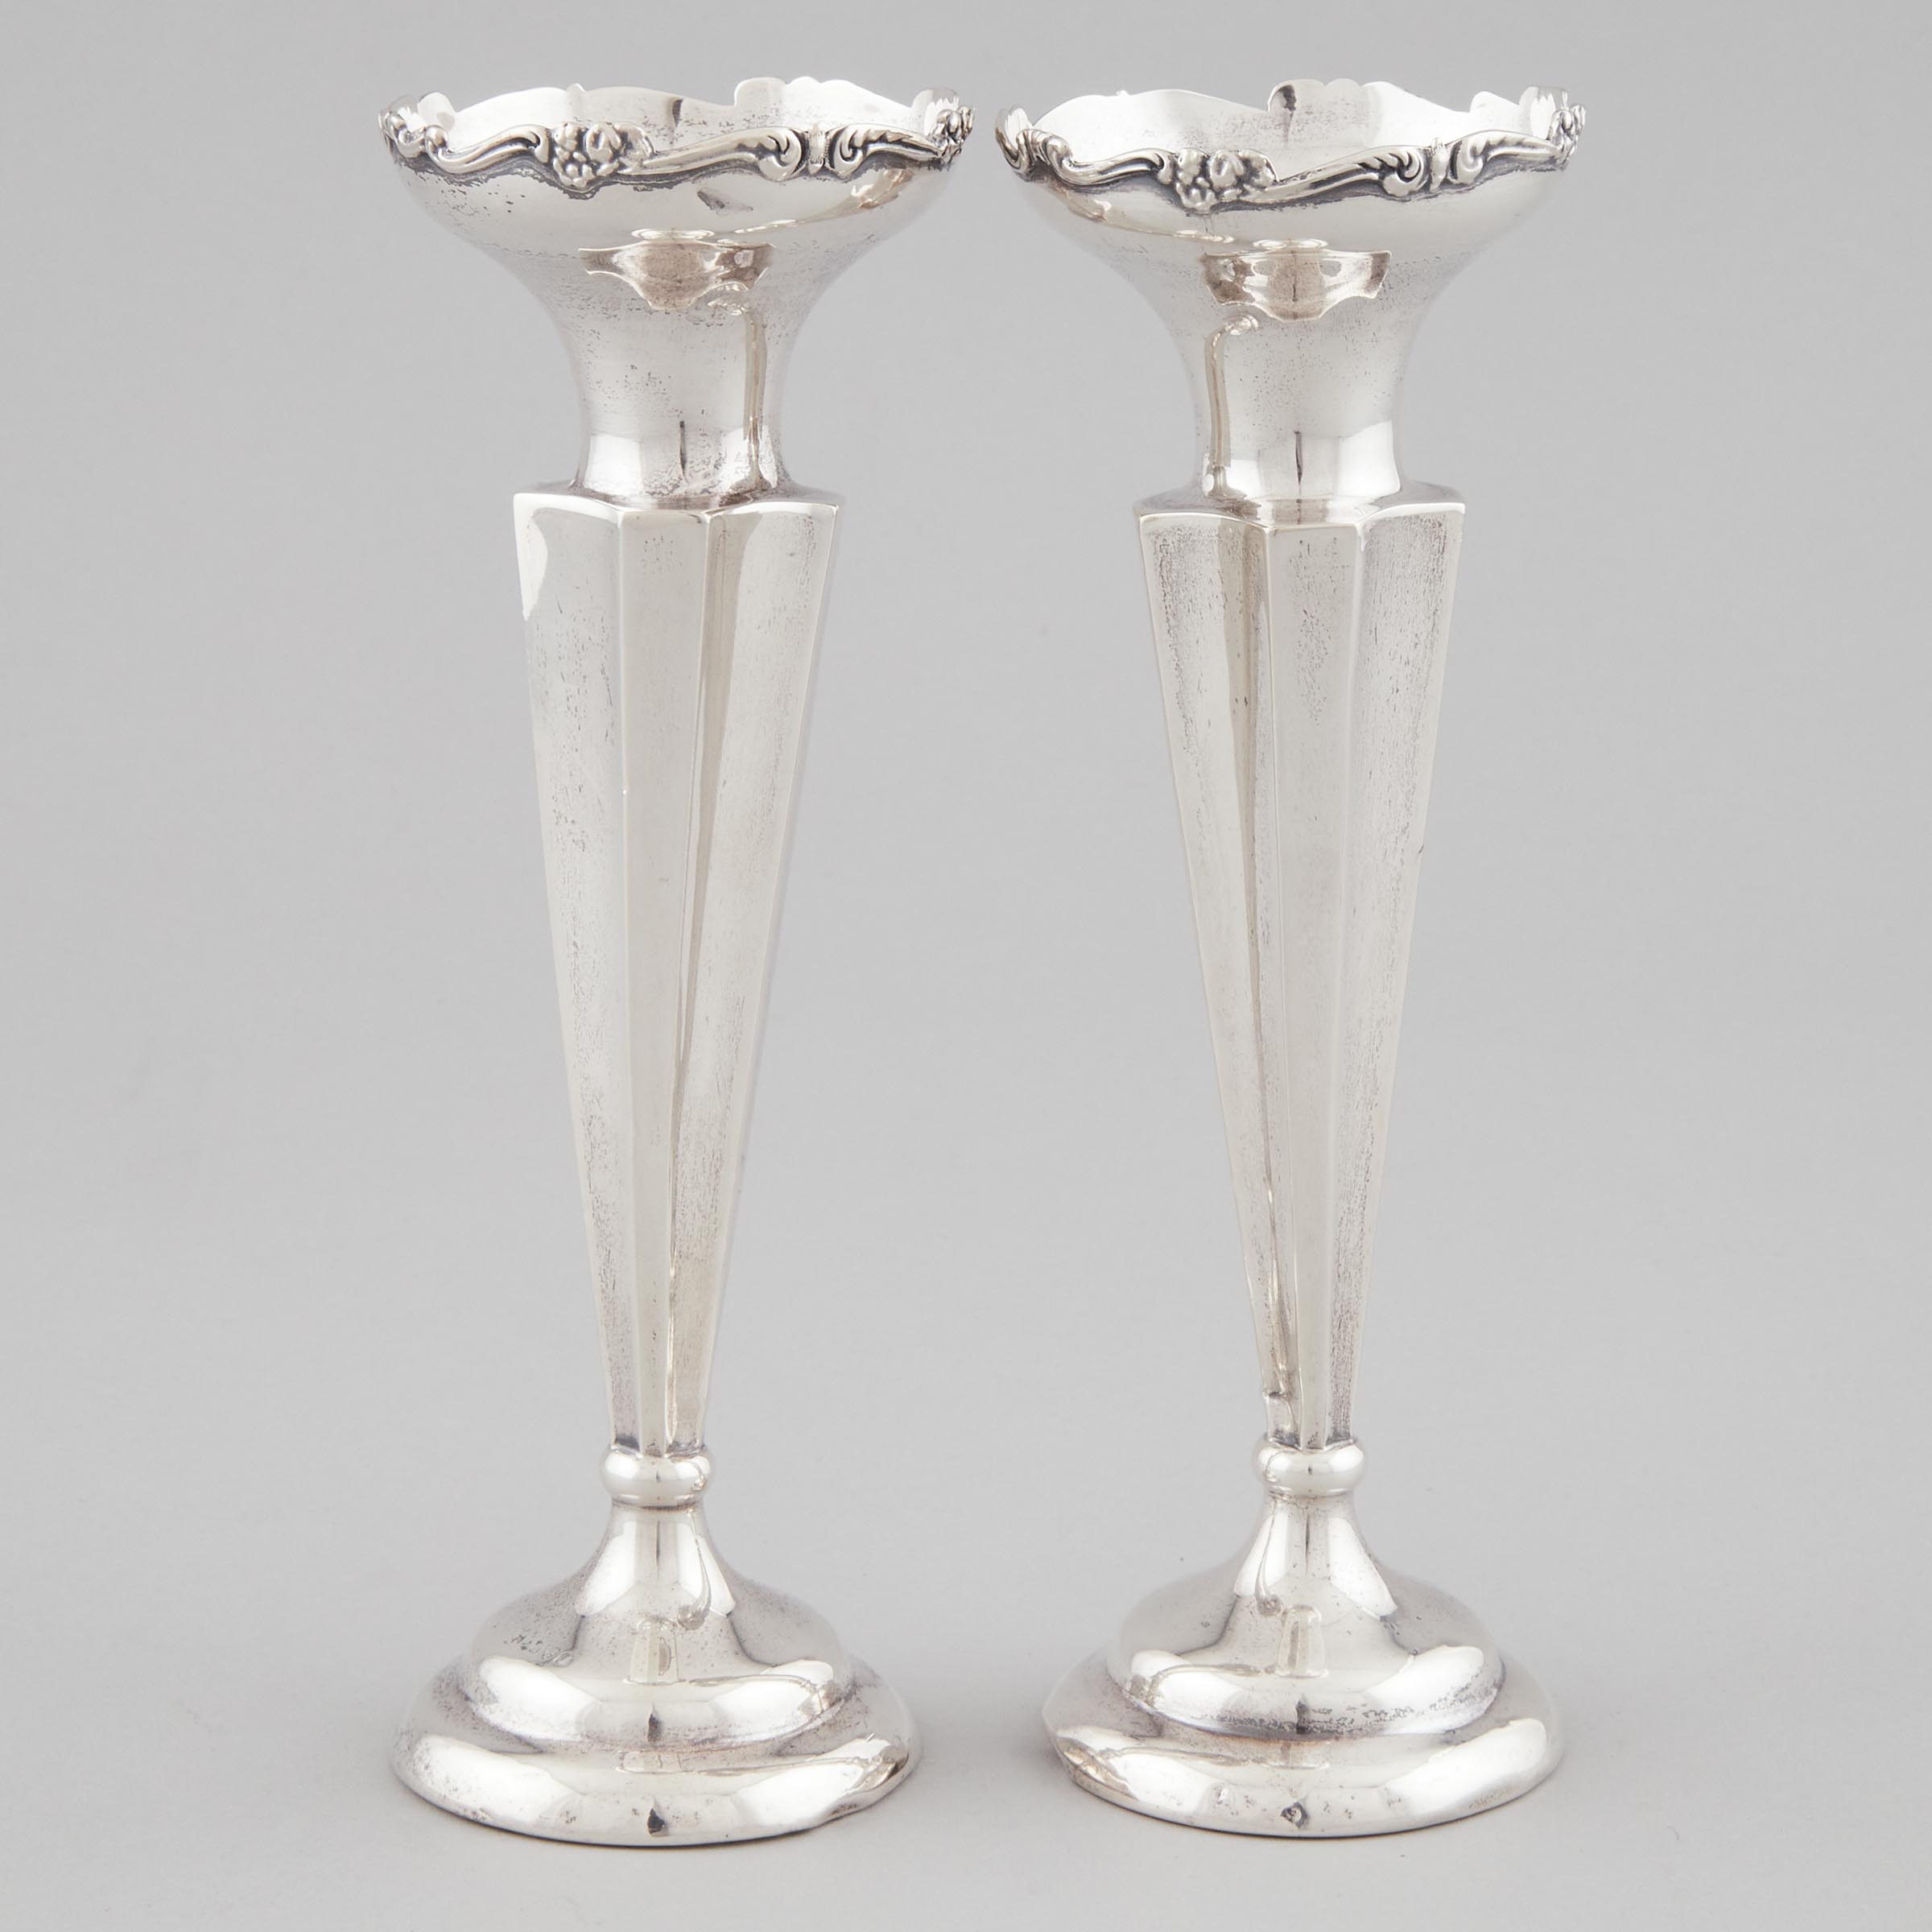 Pair of English Silver Vases, James